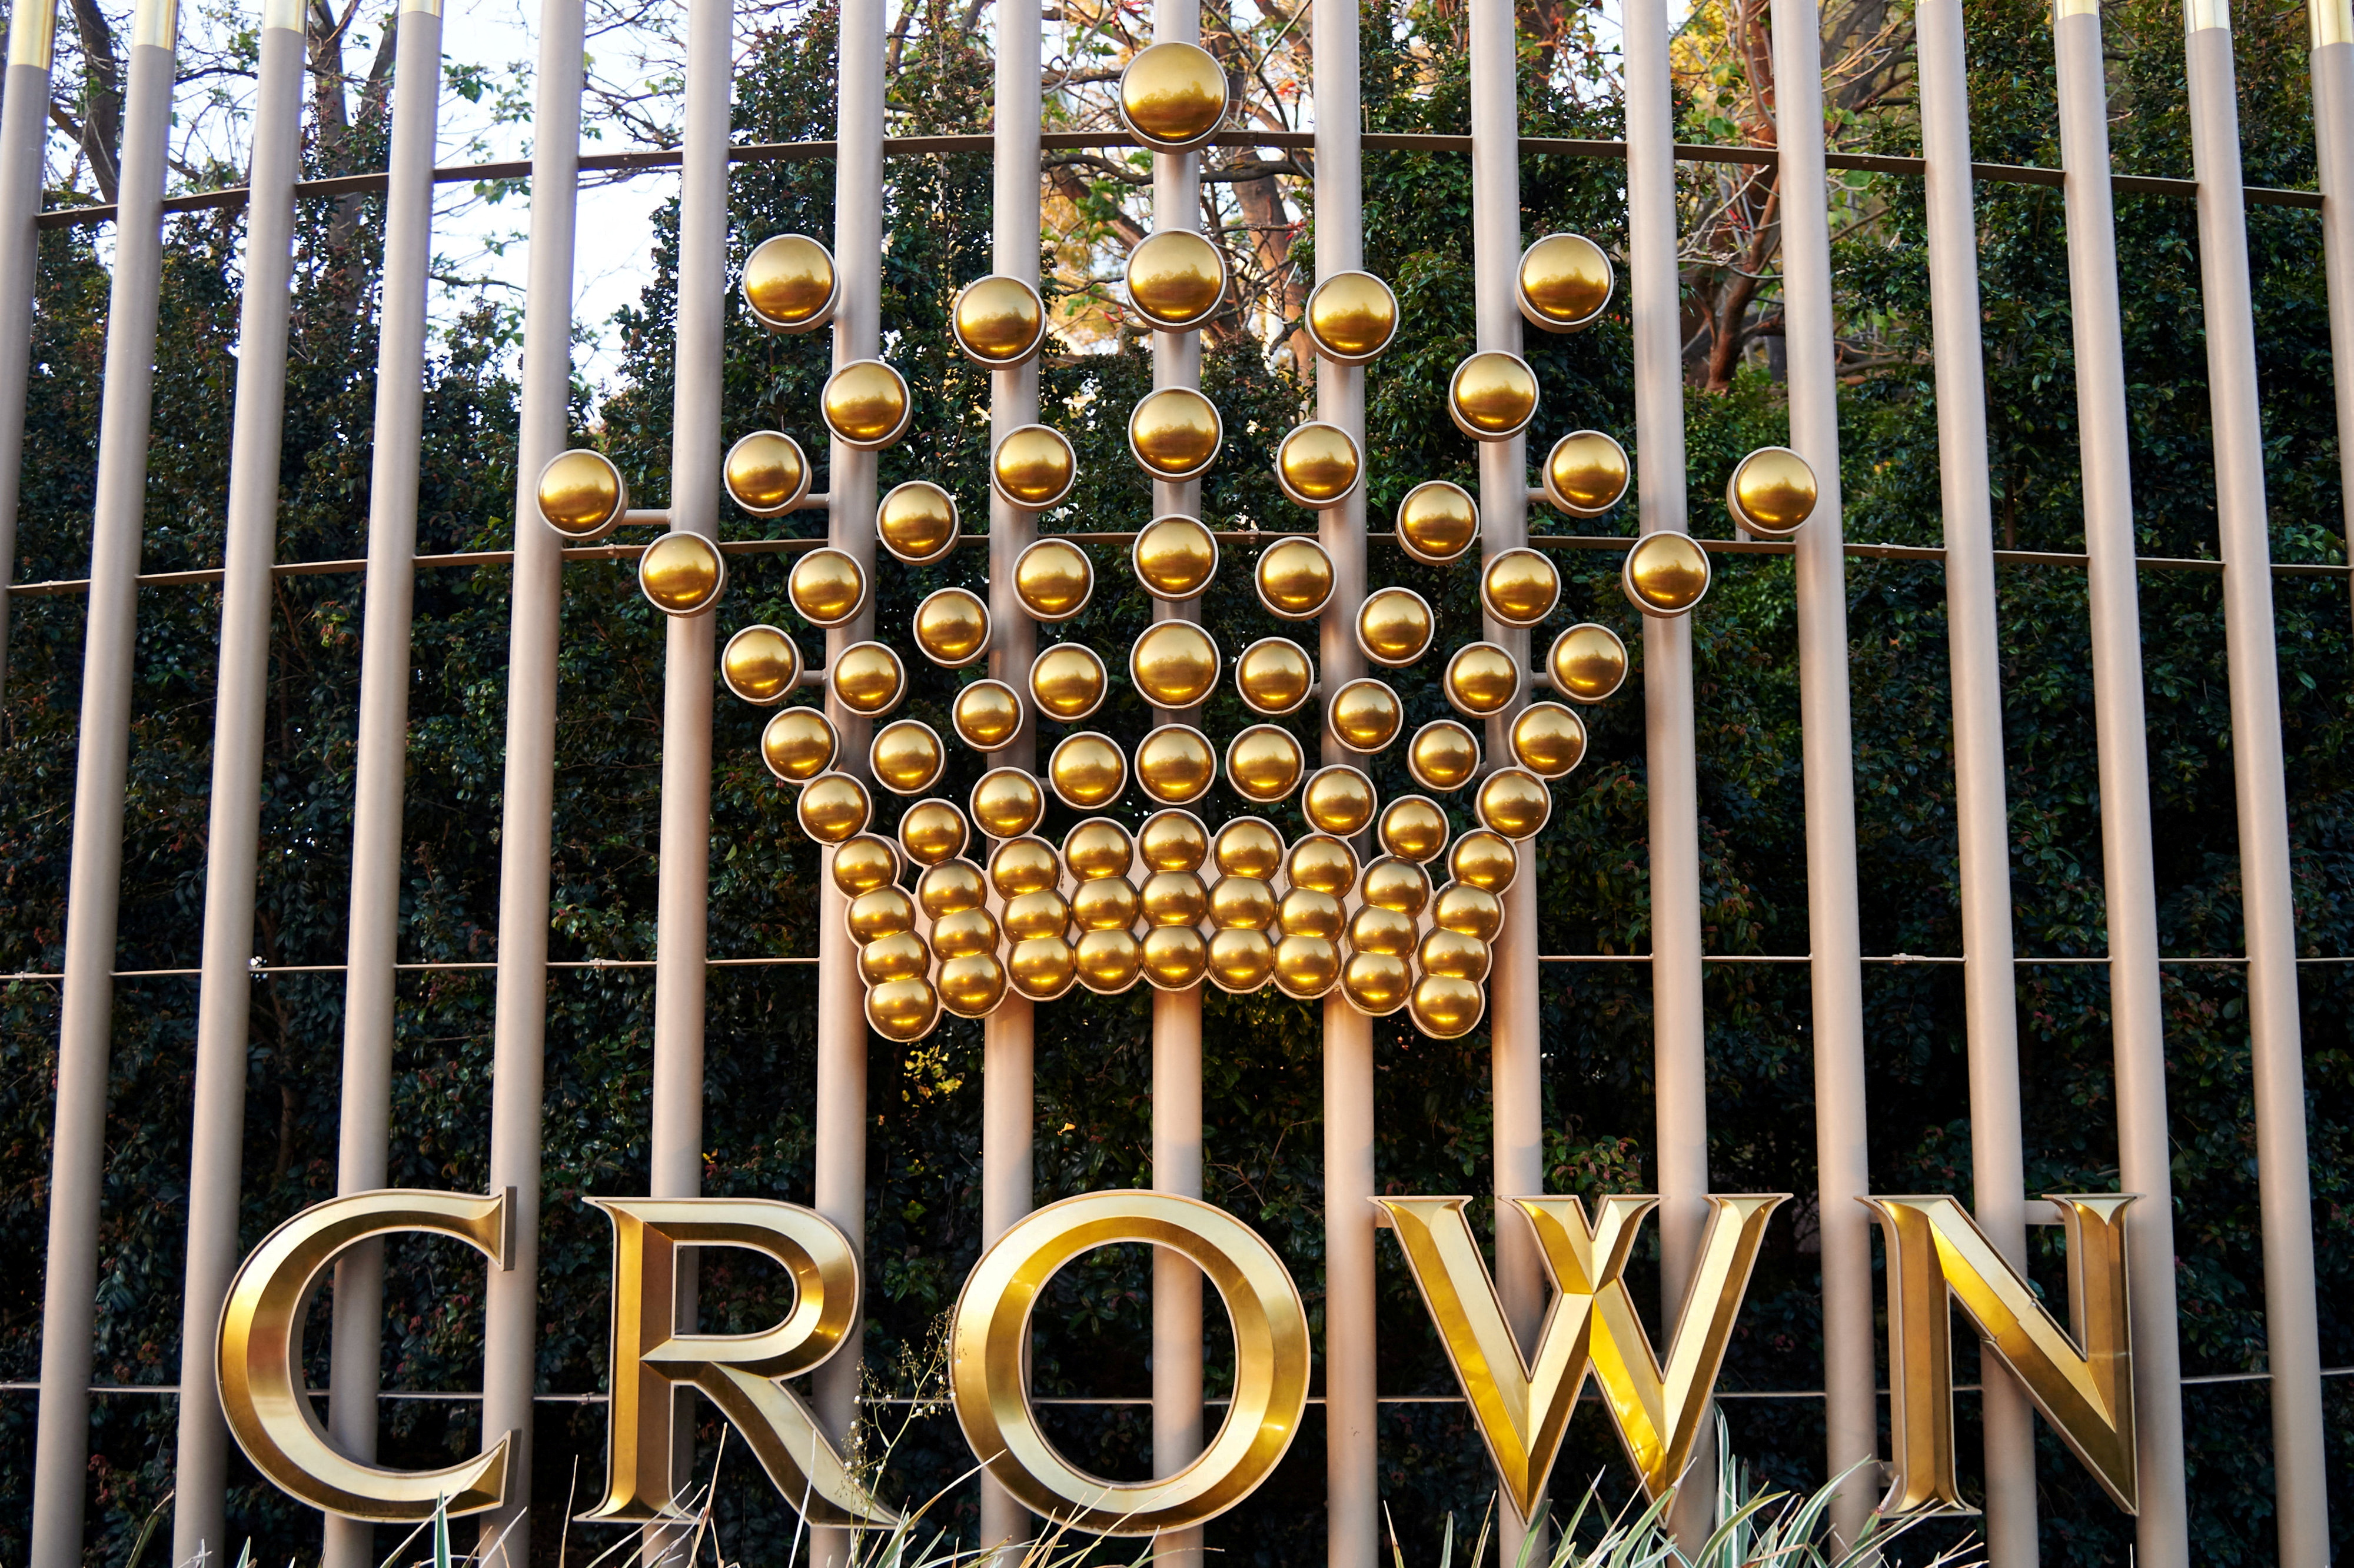 The logo of Australian casino operator Crown Resorts adorns a fence surrounding the Crown Perth hotel and casino complex in Western Australia